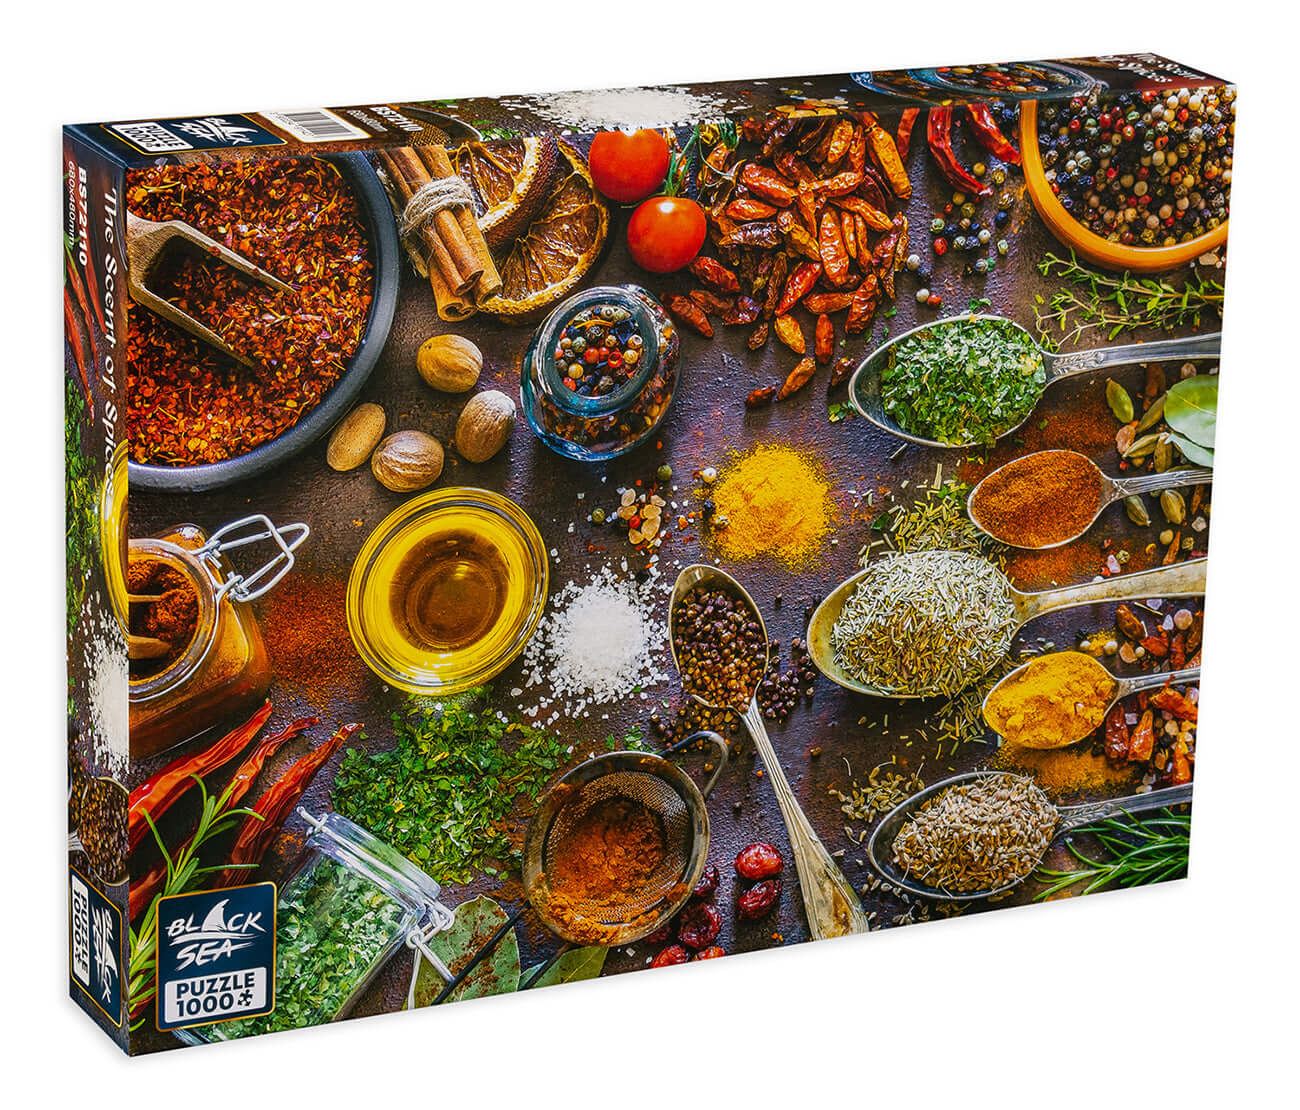 Puzzle Black Sea 1000 pieces - The scent of spices, --